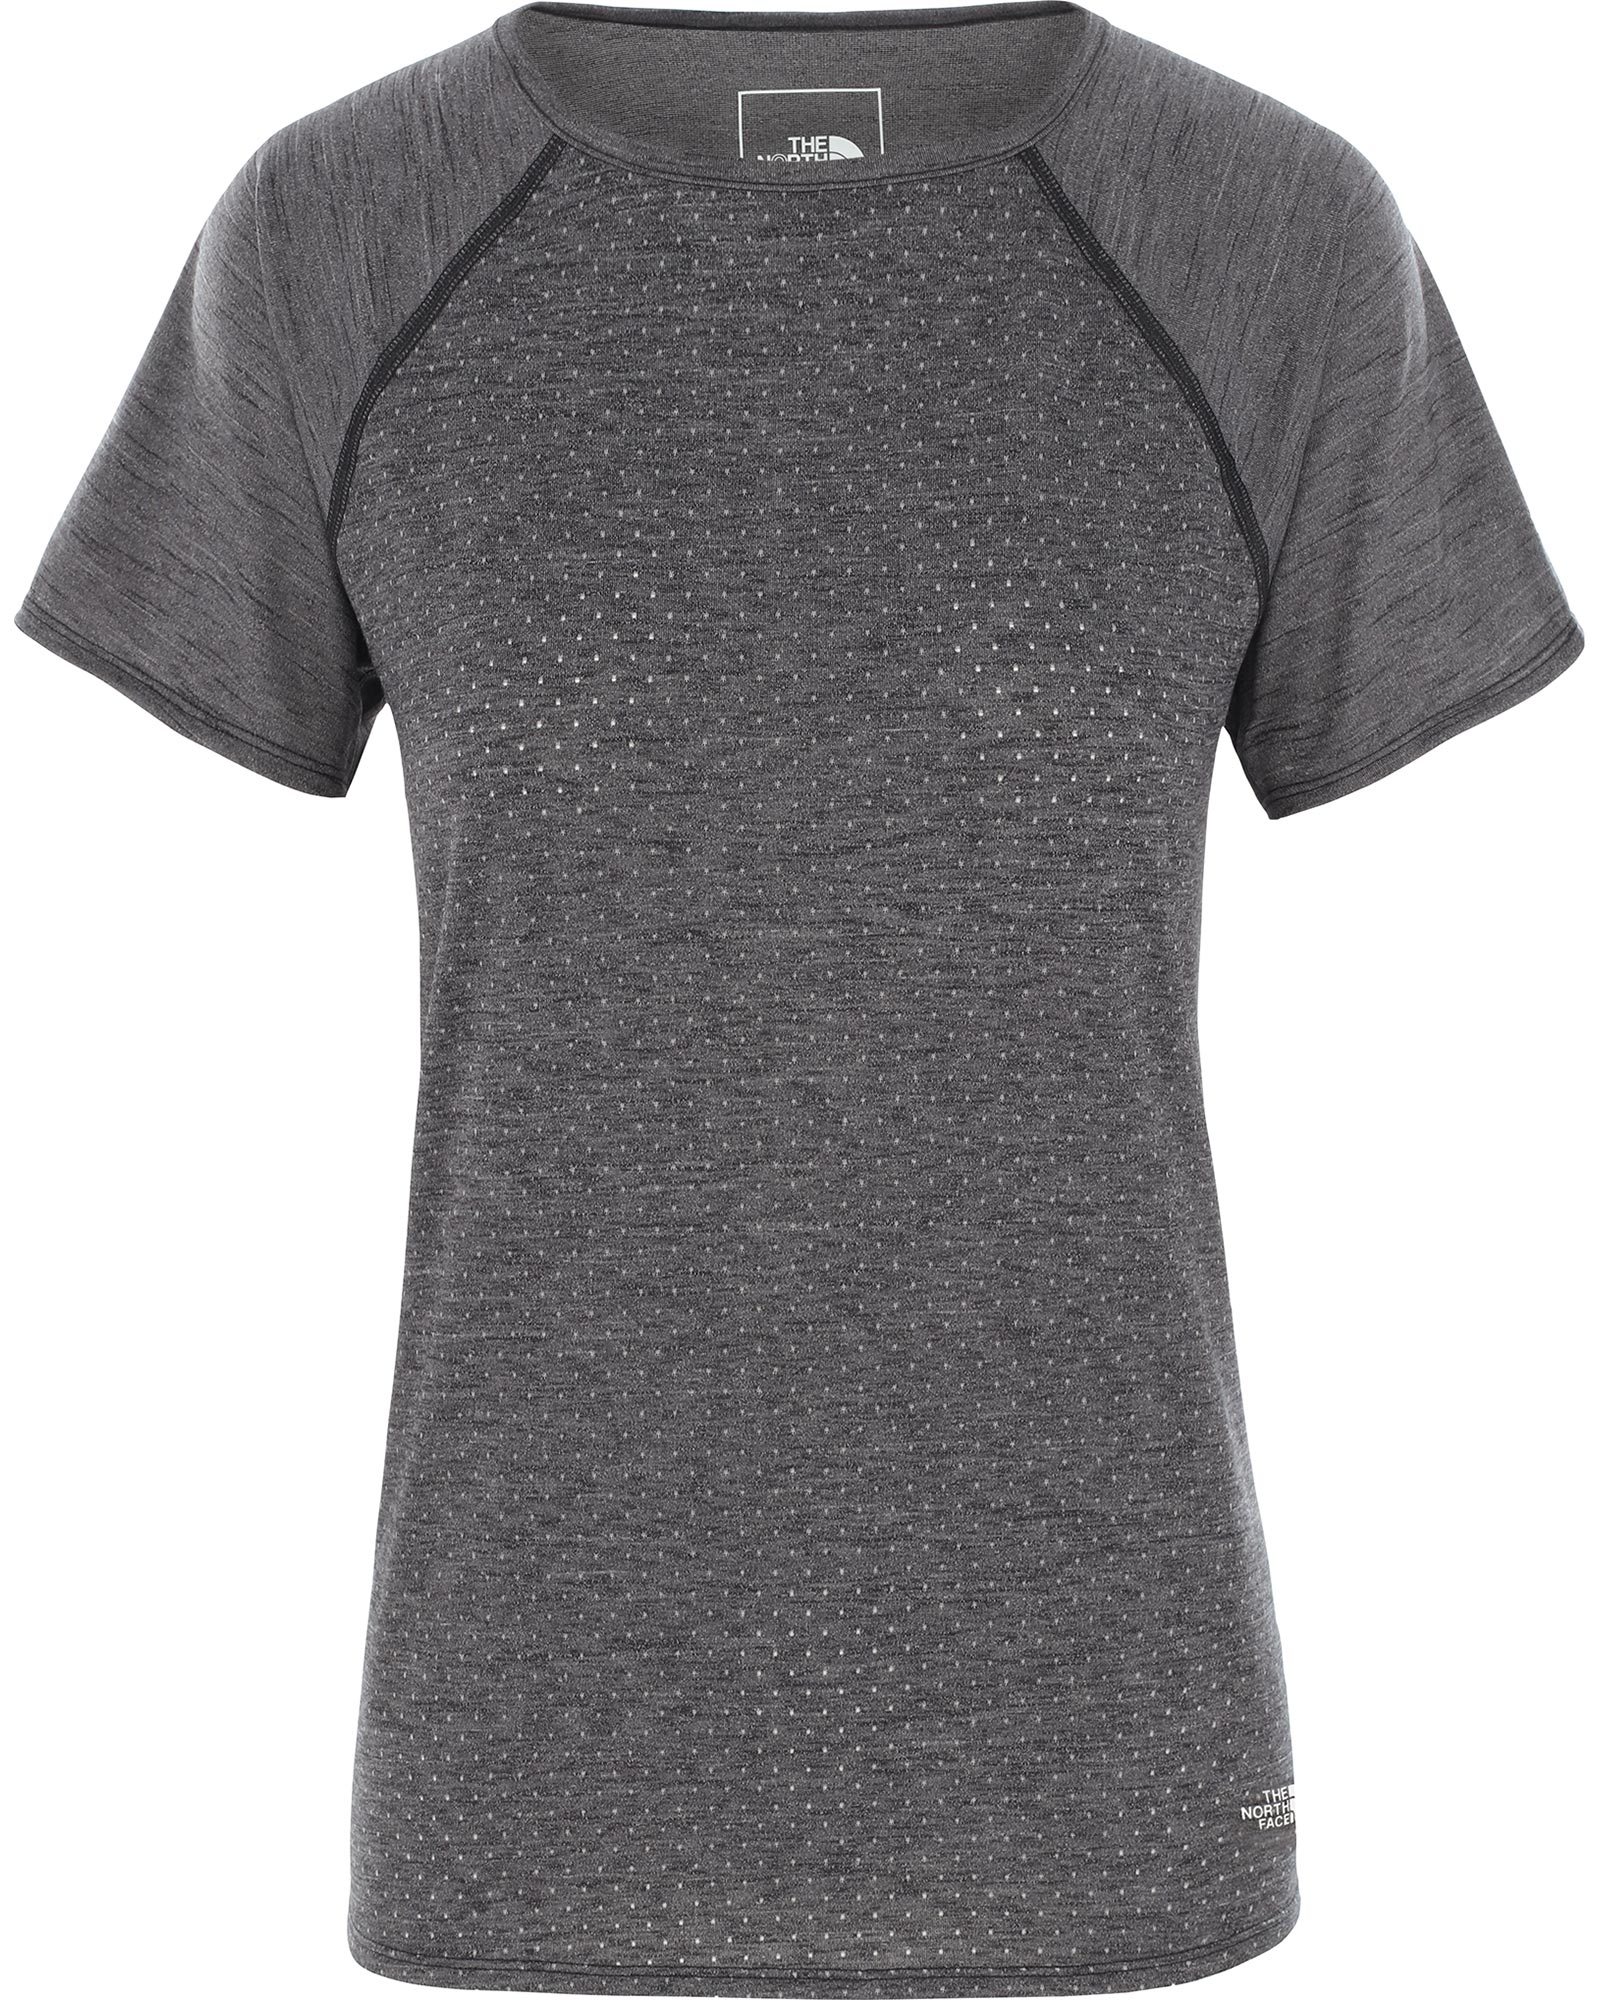 Product image of The North Face Active Trail Jacquard Women's T-Shirt